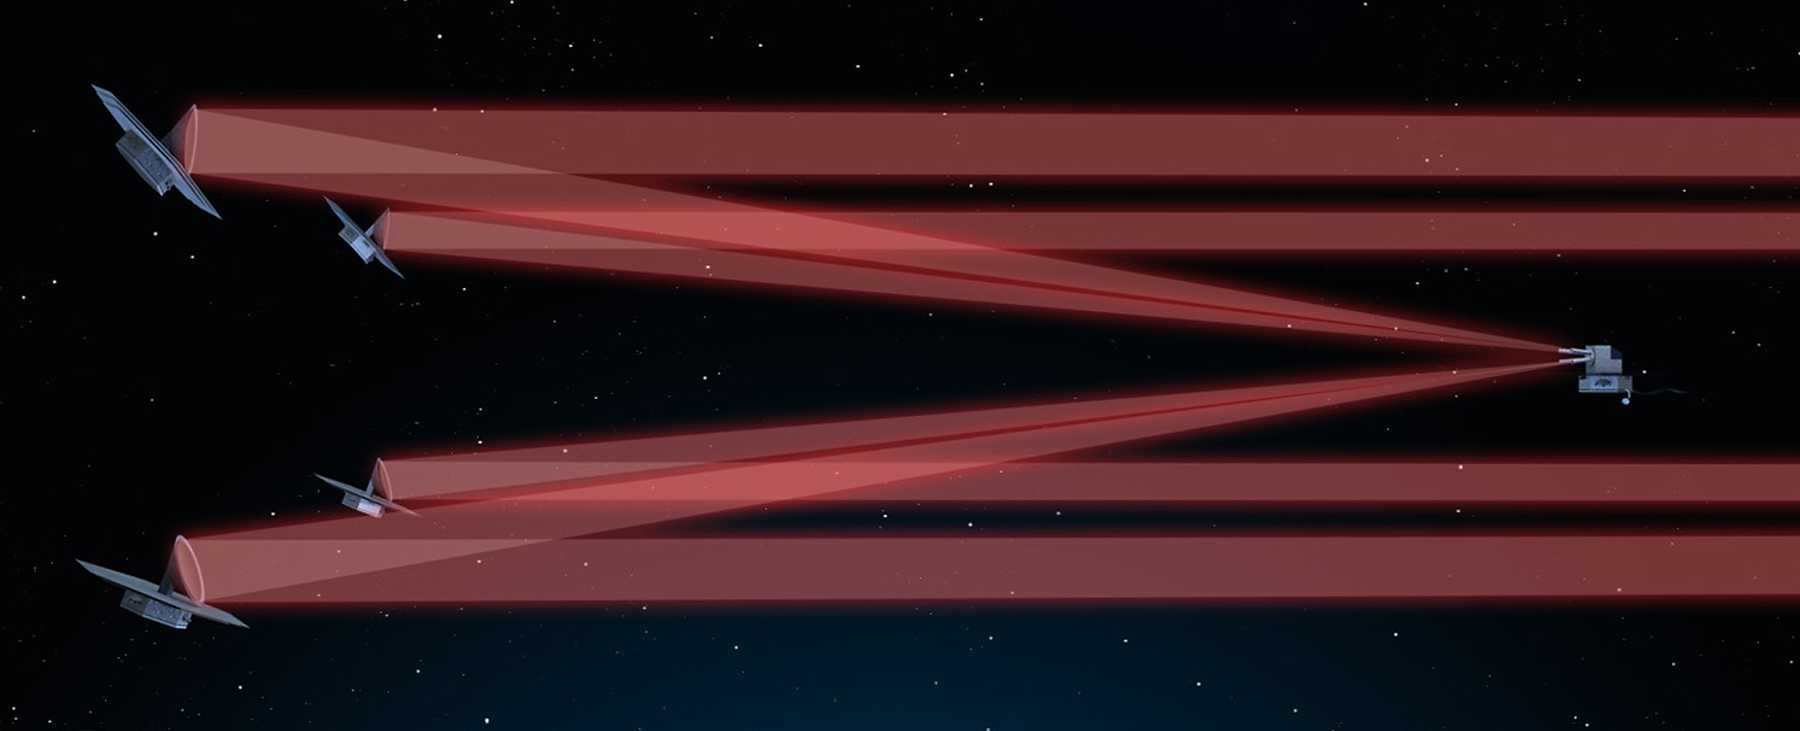 Five satellites connected by red laser beams.